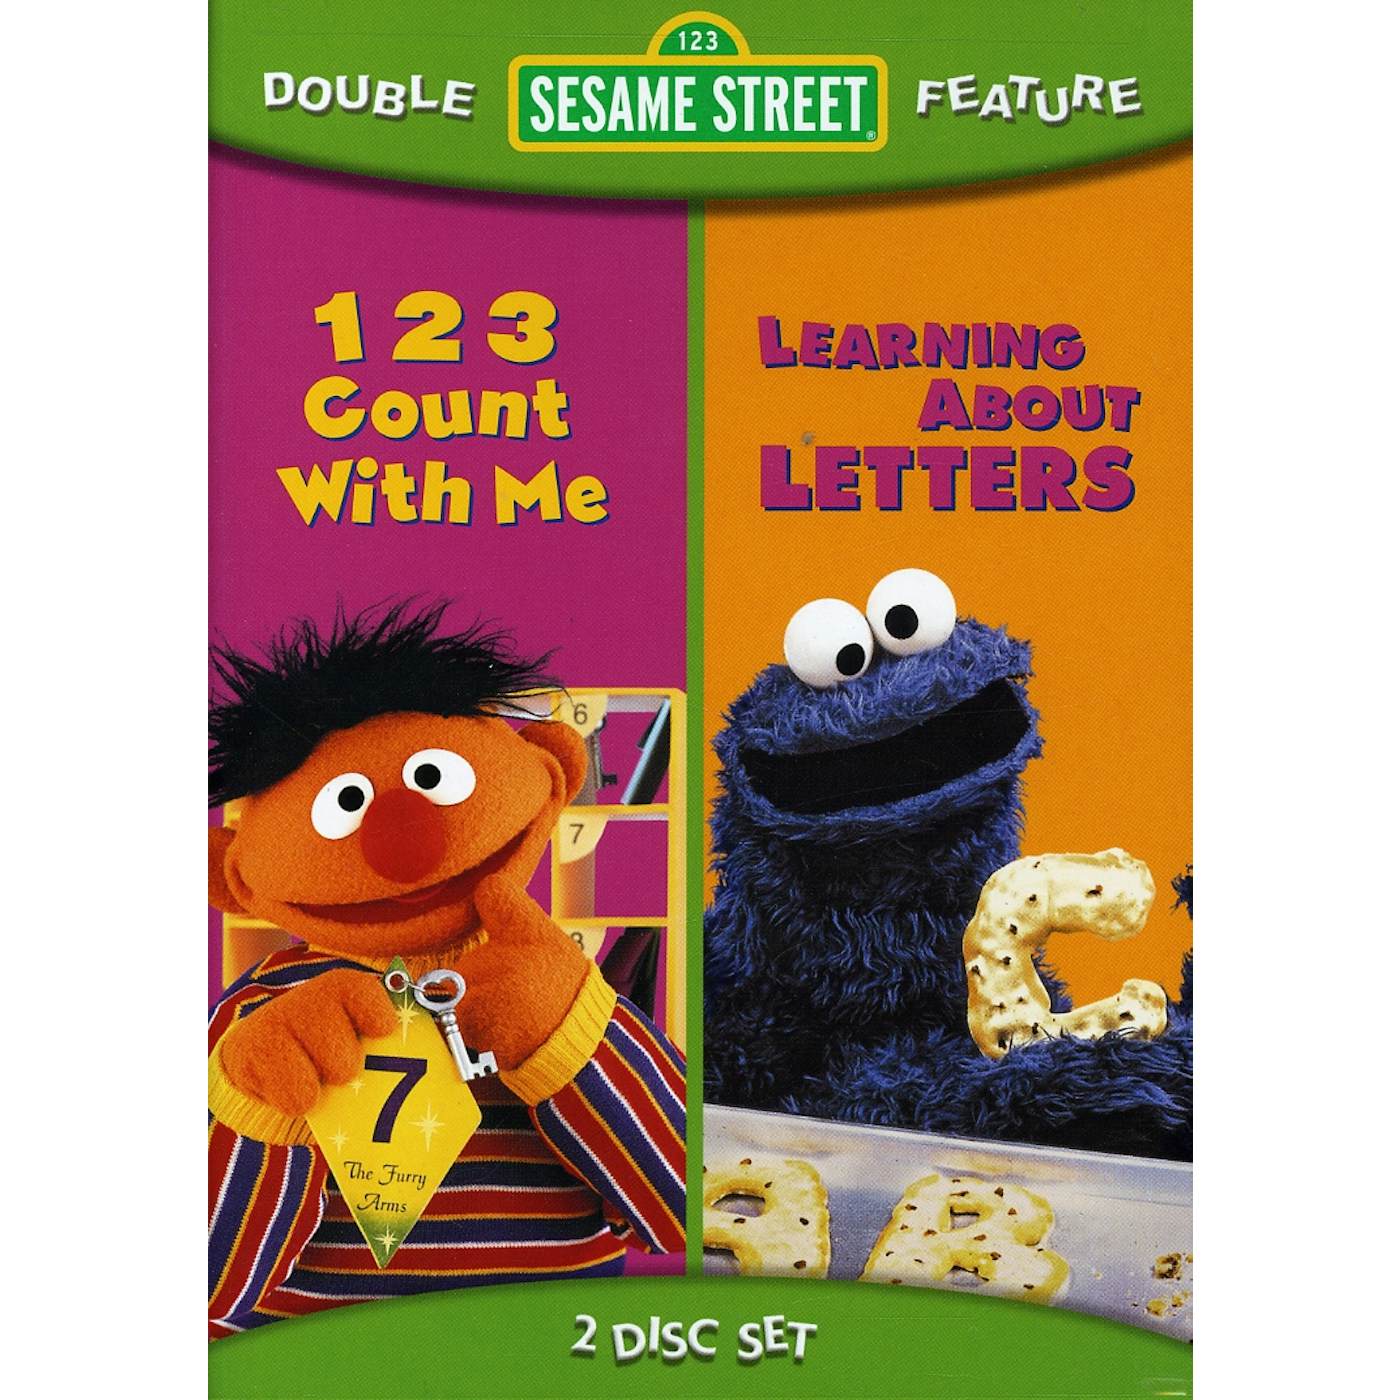 Sesame Street 123 COUNT WITH ME / LEARNING ABOUT LETTERS DVD